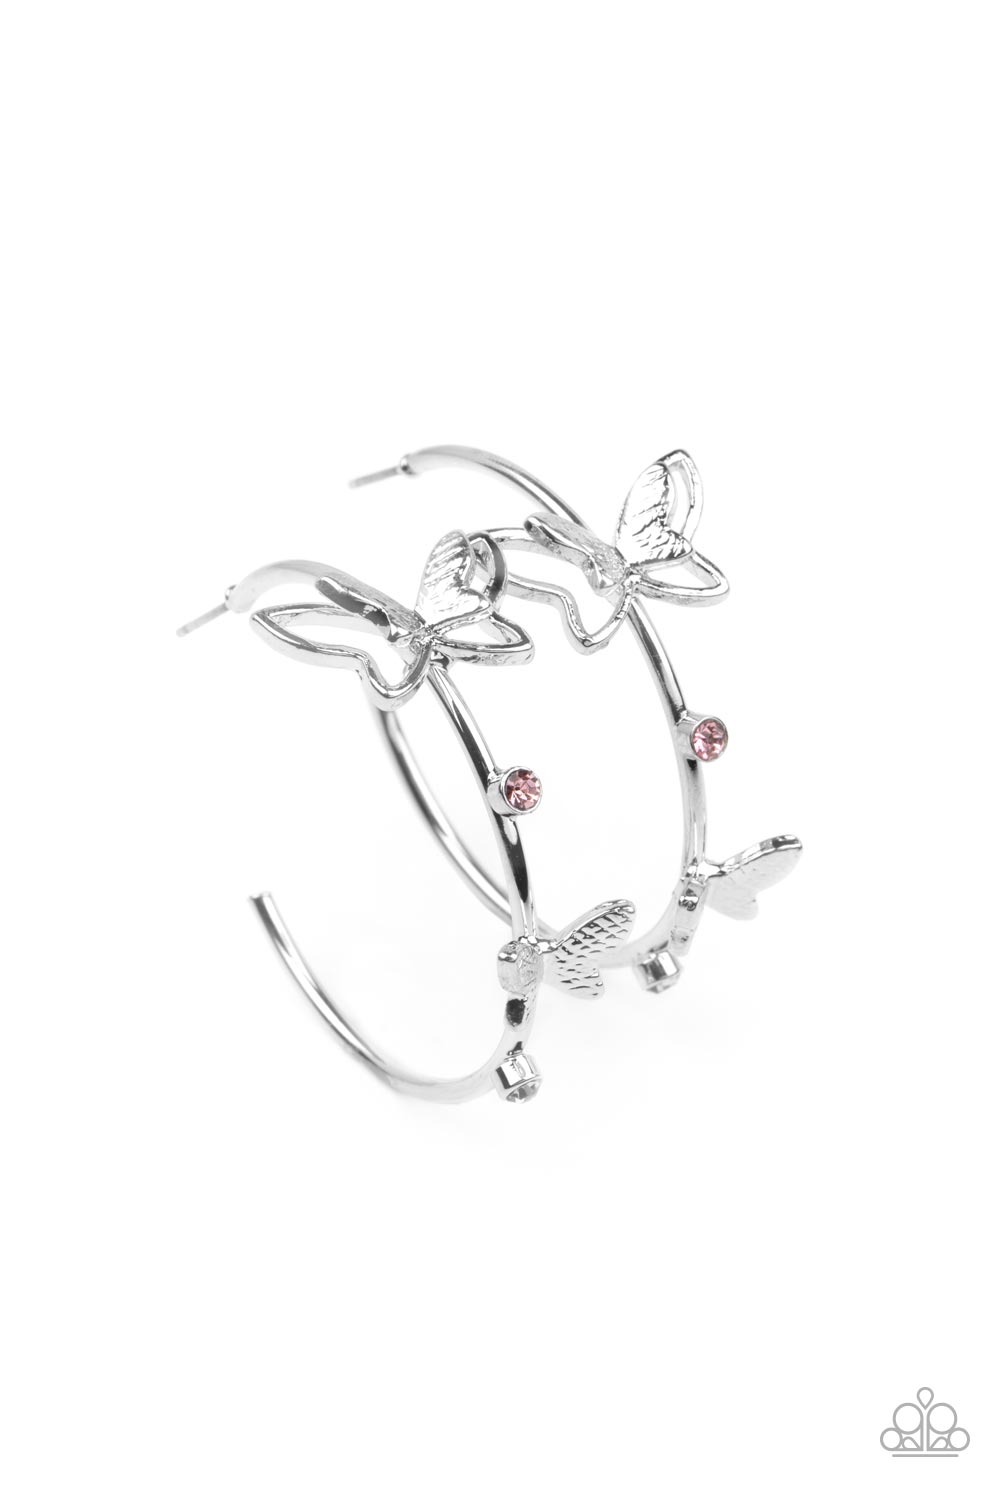 A pair of dainty silver butterflies flutter atop a glistening silver hoop dotted with dainty pink rhinestones, creating a whimsical sight. Earring attaches to a standard post fitting. Hoop measures approximately 1 1/2" in diameter.